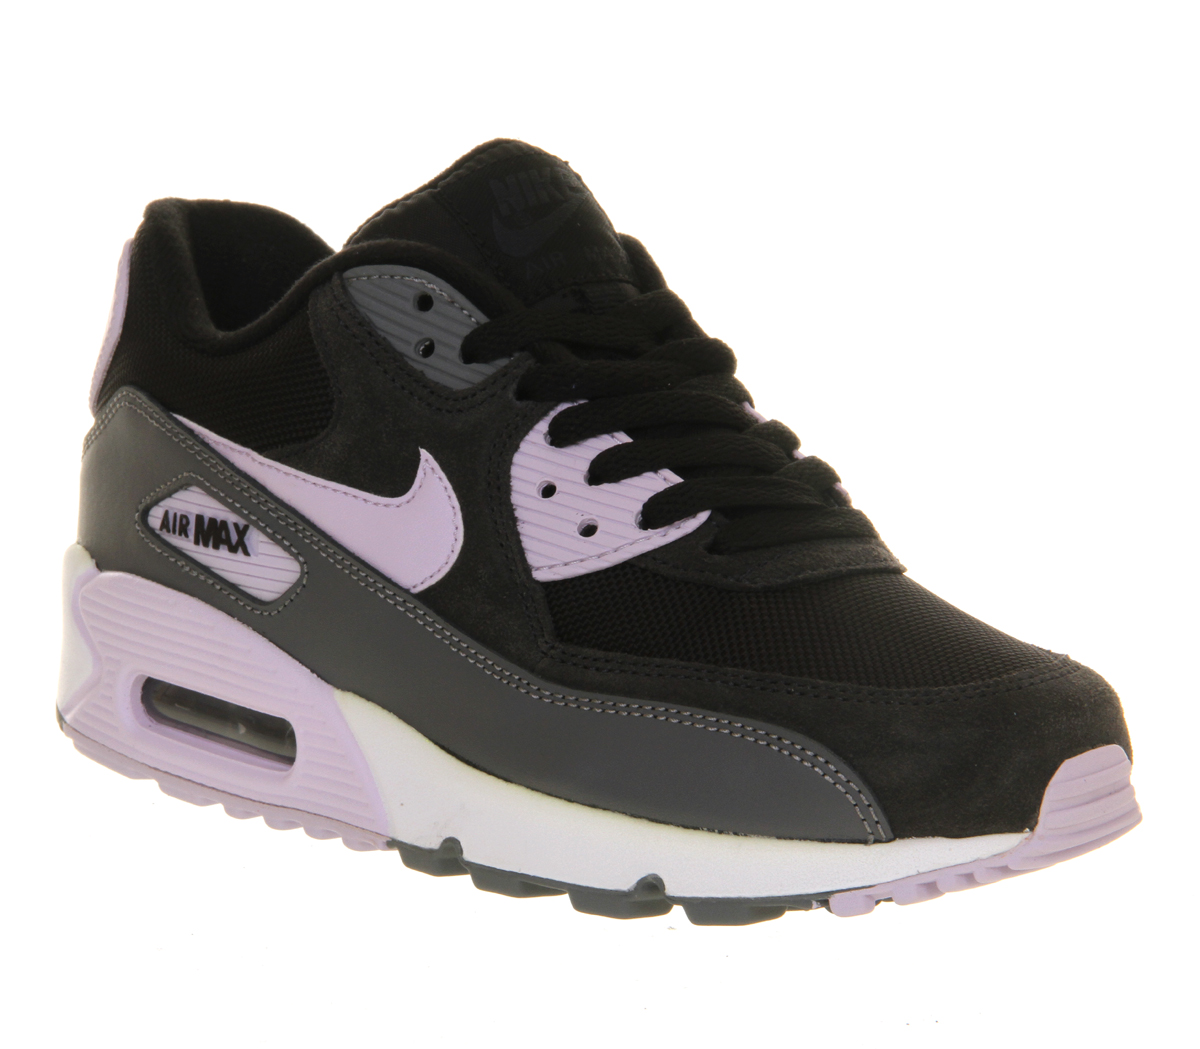 NikeAir Max 90 (w)Black Frost Anthracite Grey